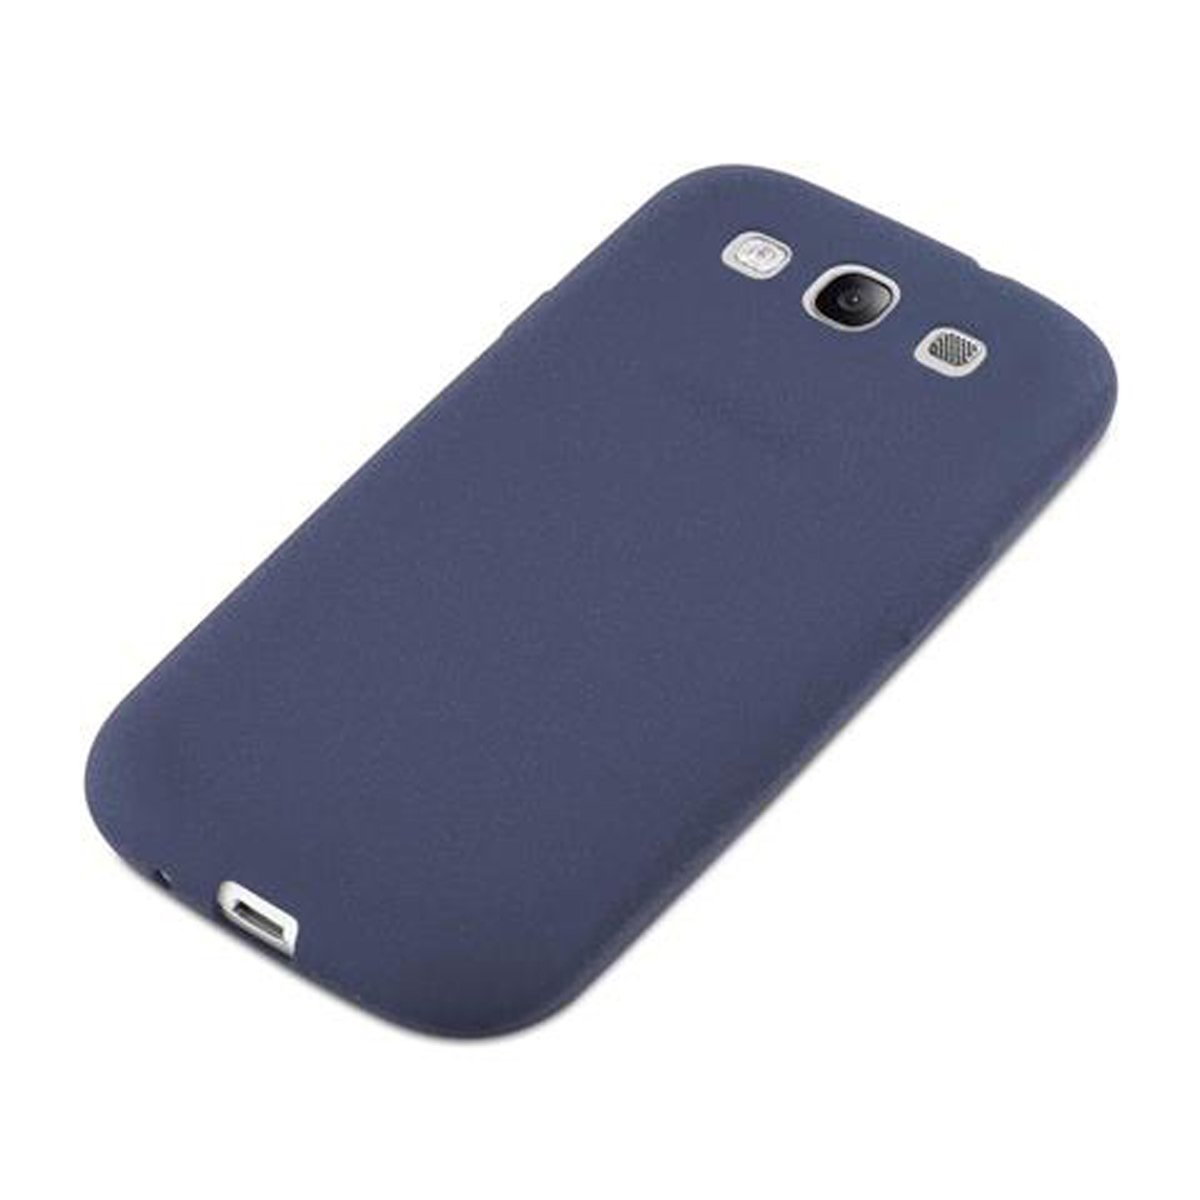 / Samsung, NEO, BLAU Galaxy S3 Frosted Schutzhülle, DUNKEL FROST Backcover, S3 TPU CADORABO